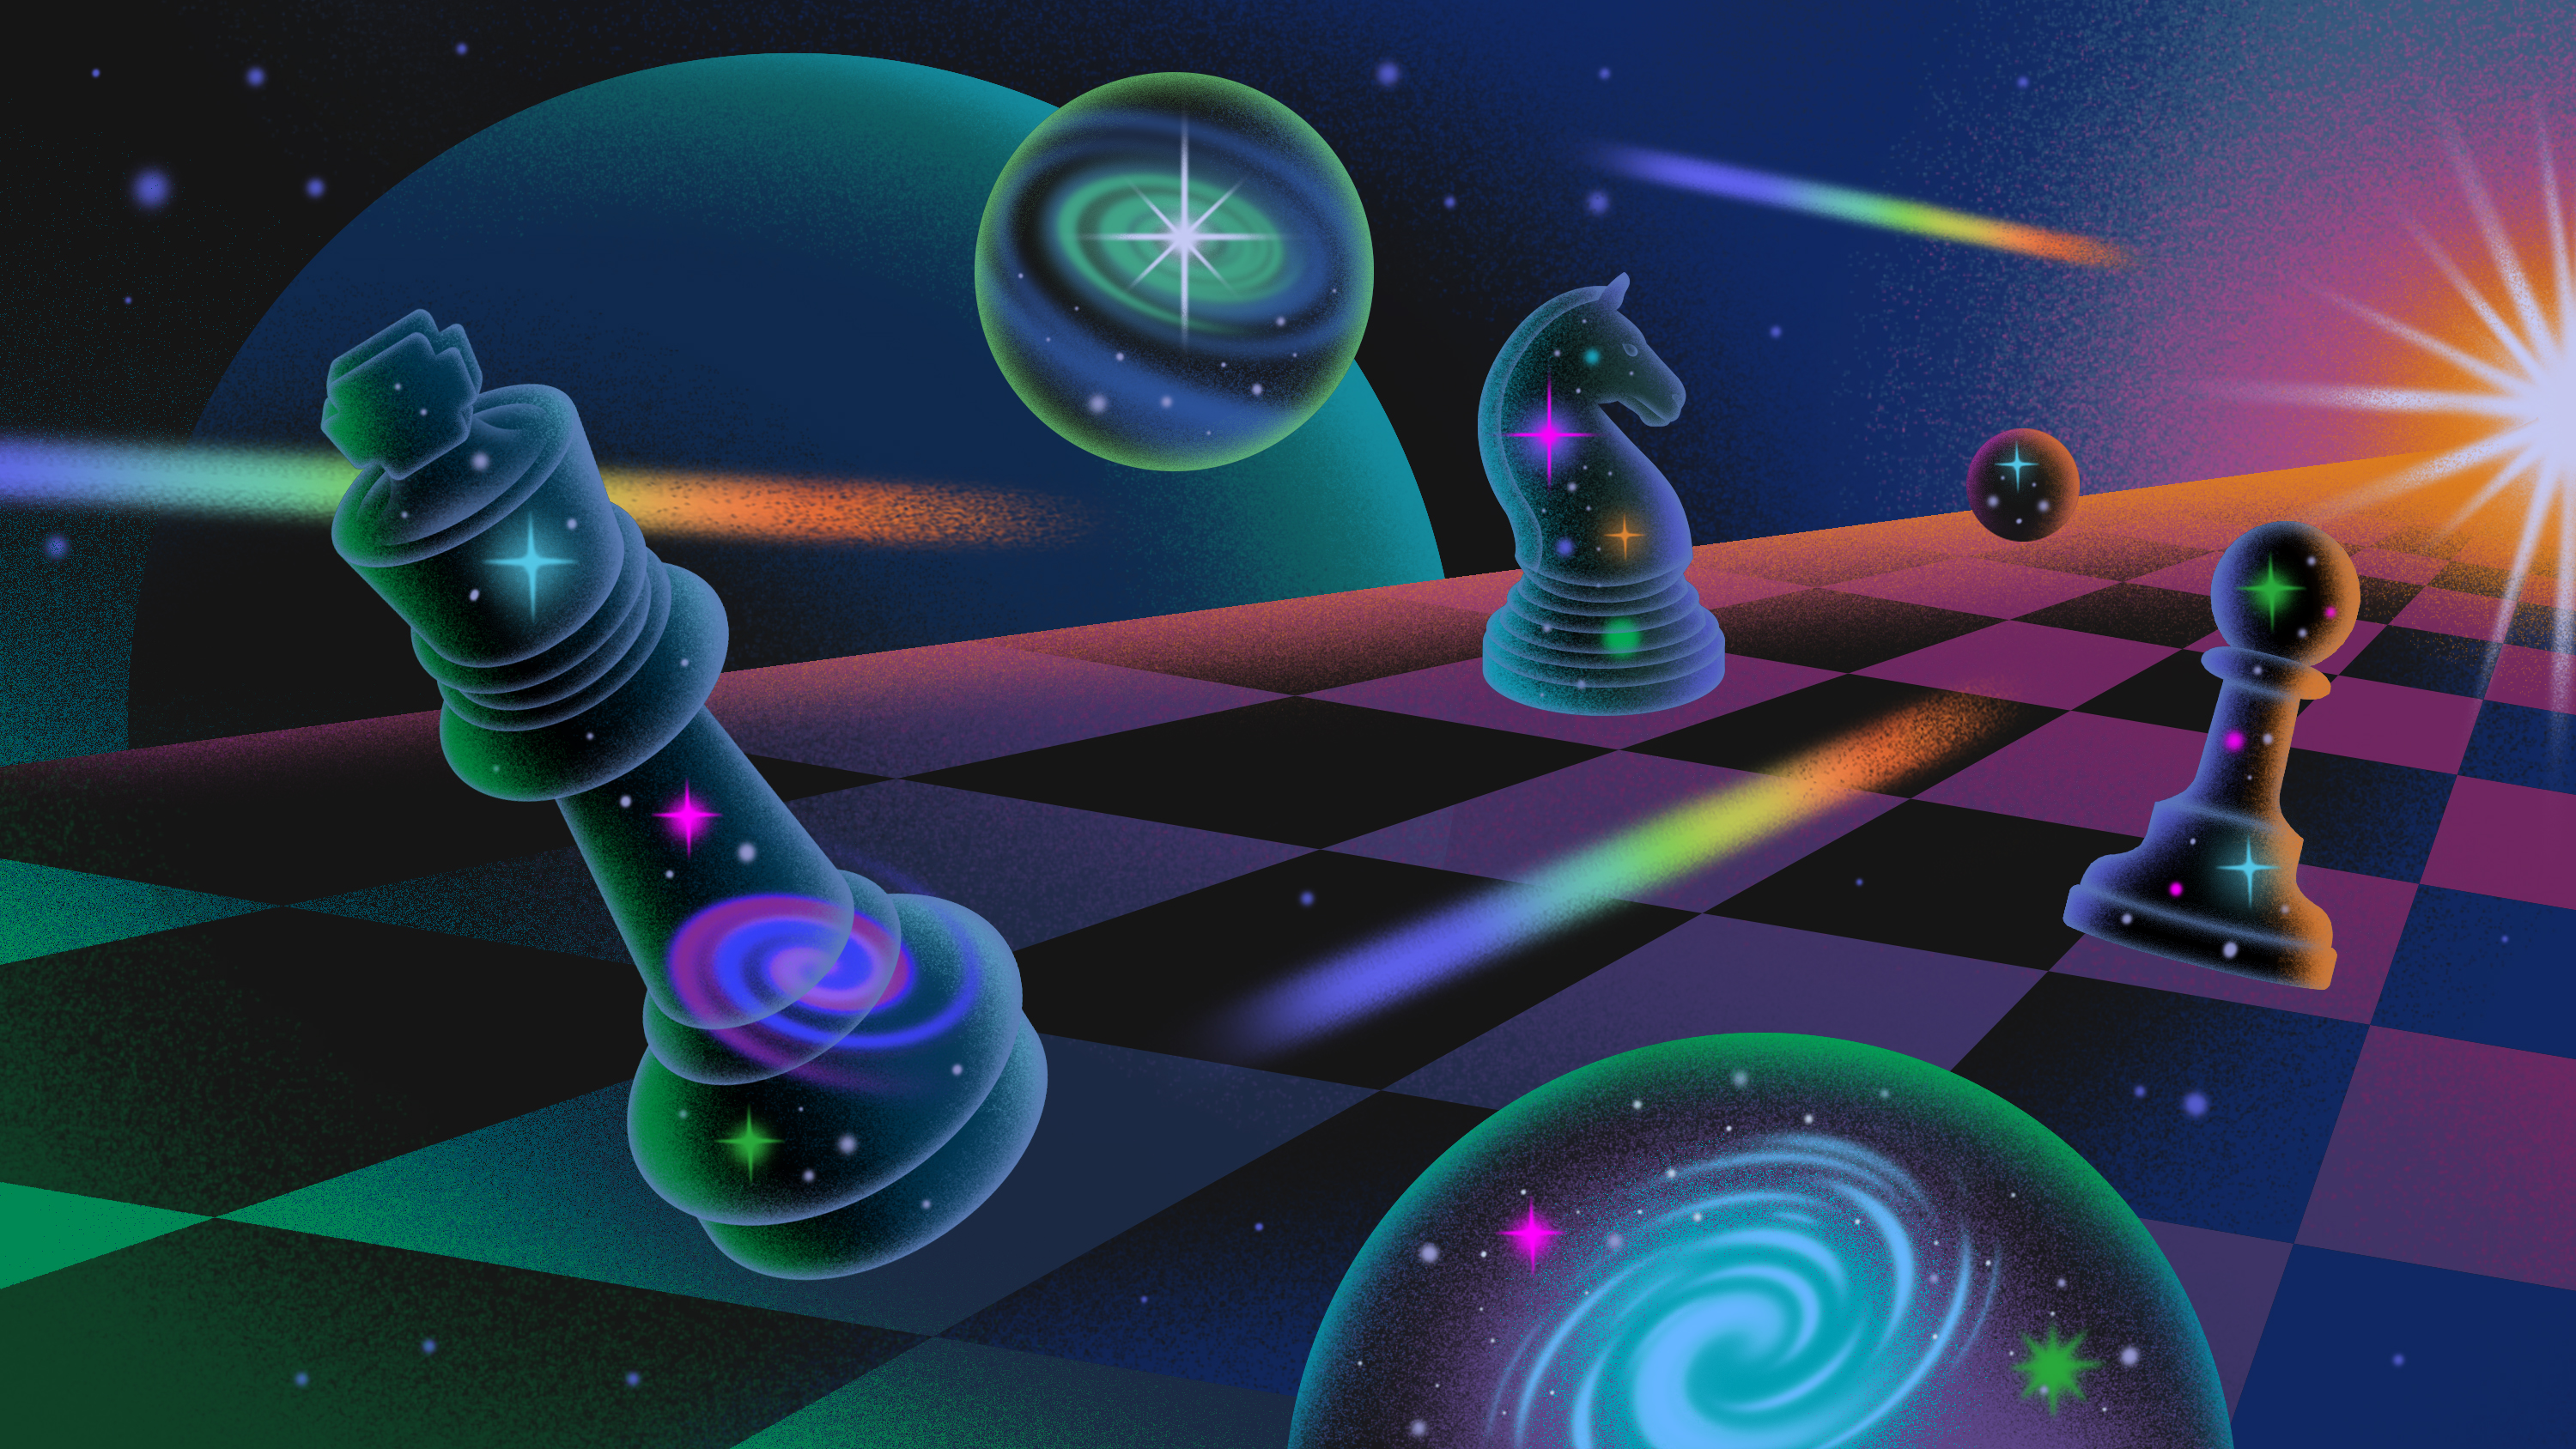 chess pieces fly away across a cosmic chessboard toward a bright star